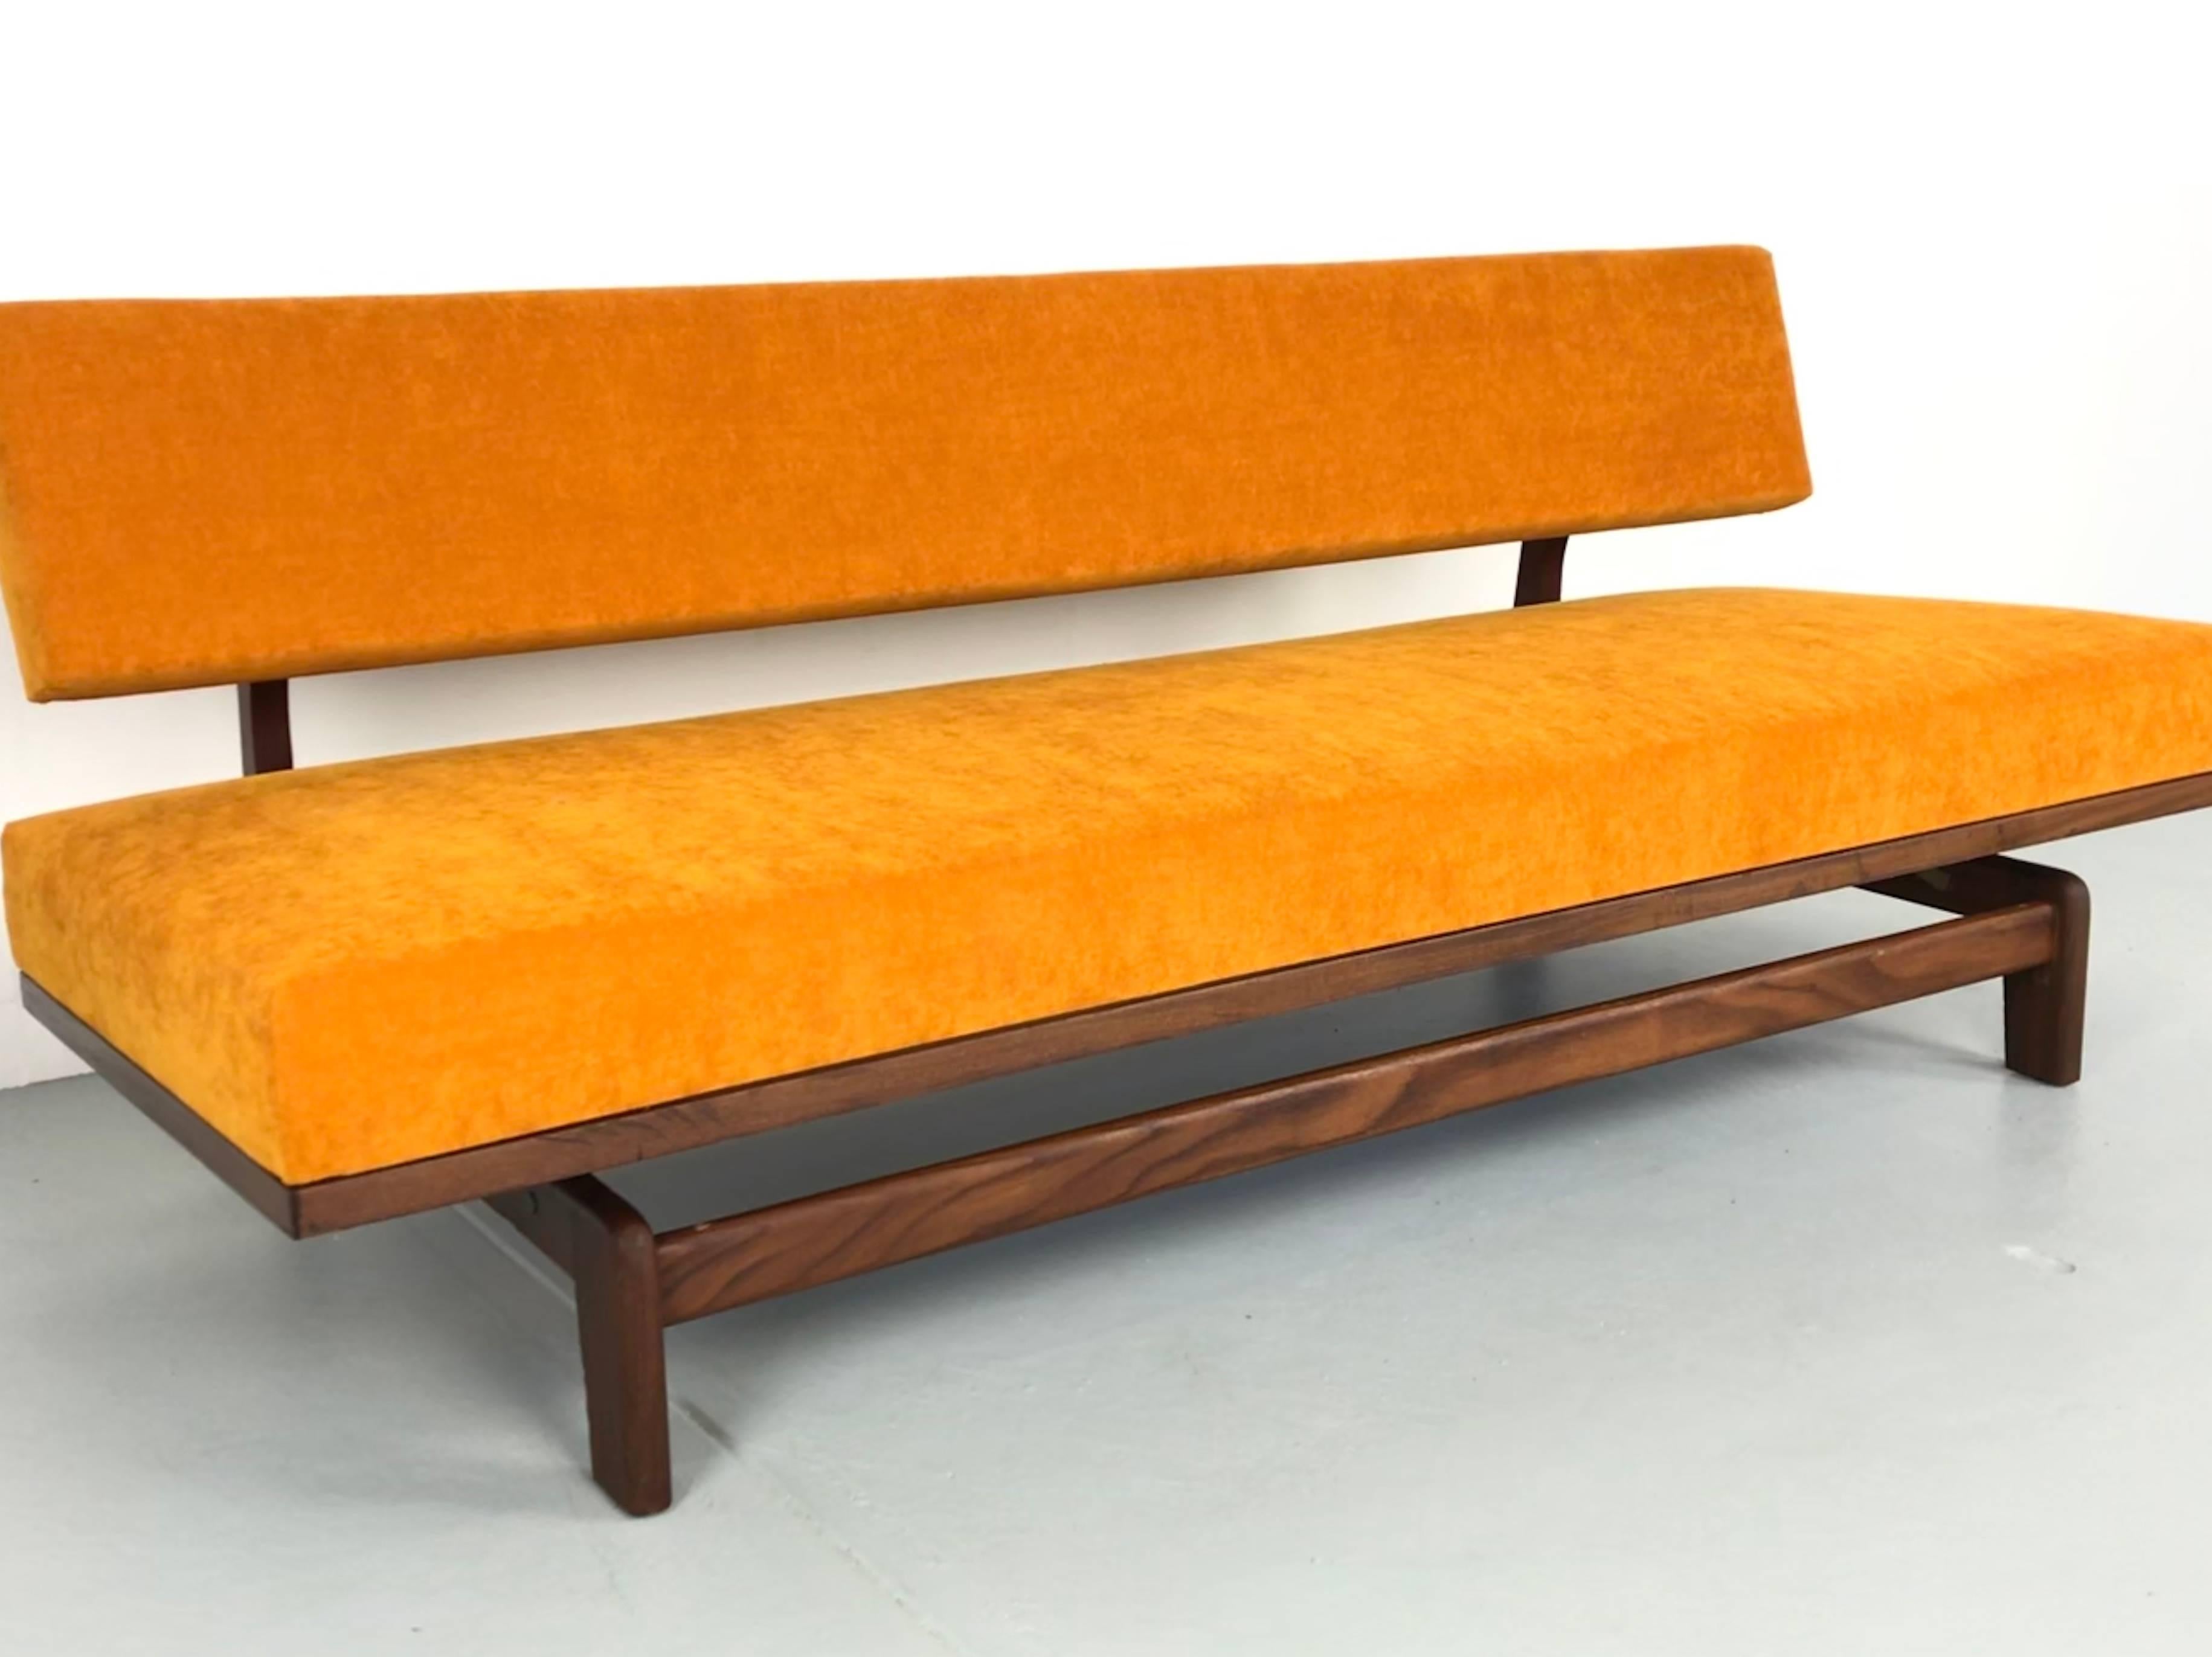 High quality teak wood sofa by Hans Bellmann, produced by Wilkhahn in Germany. The sofa can be used as a daybed. The cushions have been reupholstered with a golden yellow velvet fabric. Great condition with slight signs of use on the wood frame.